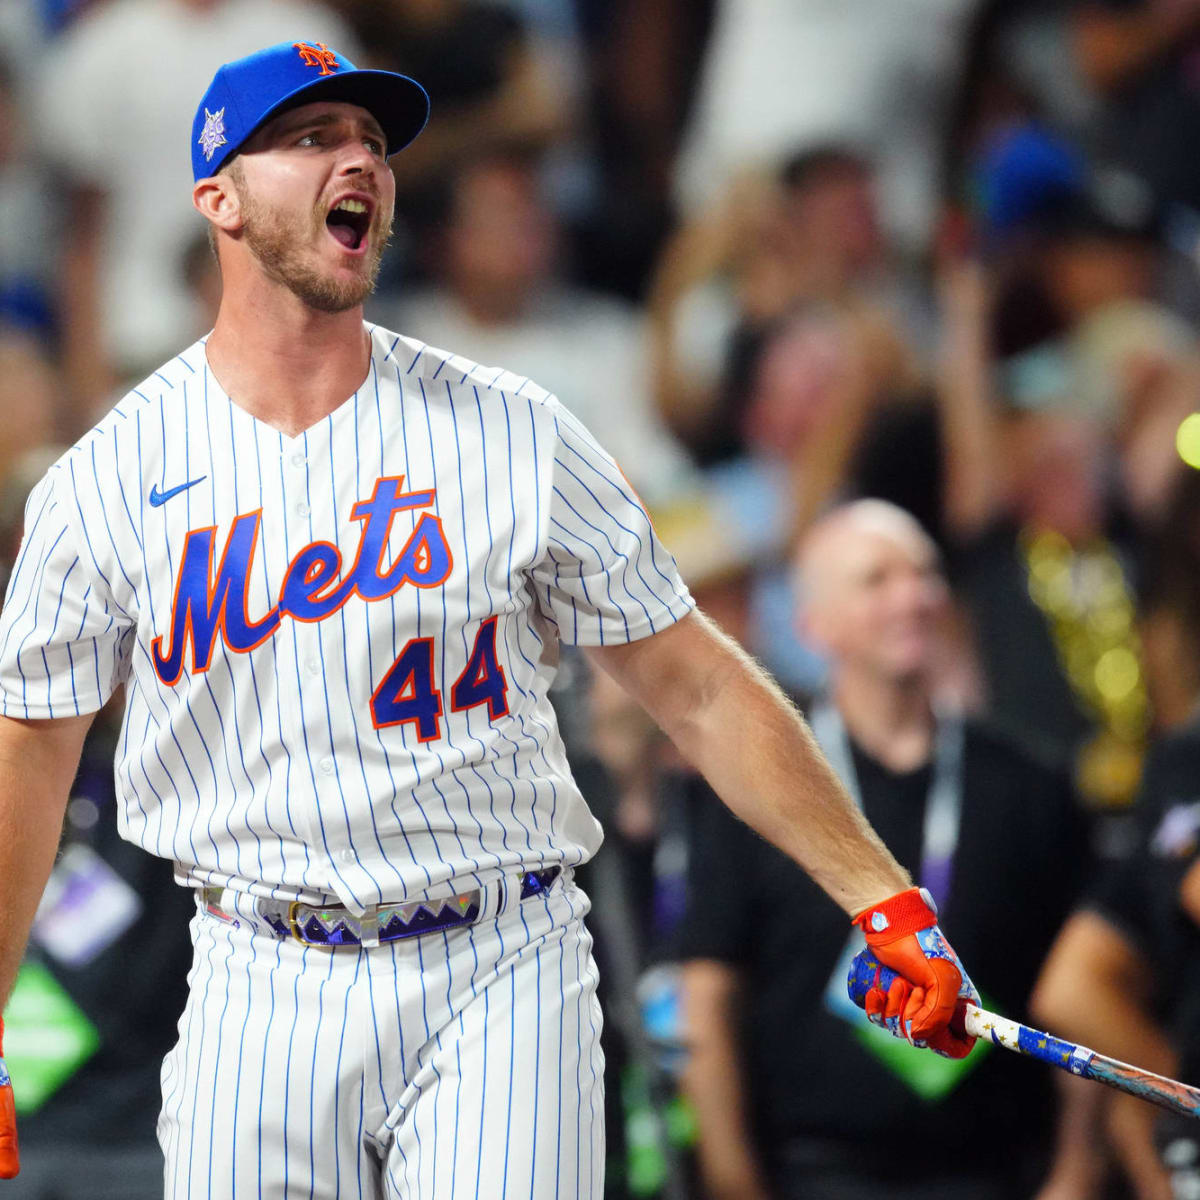 2019 MLB Home Run Derby results: Mets rookie Pete Alonso defeats